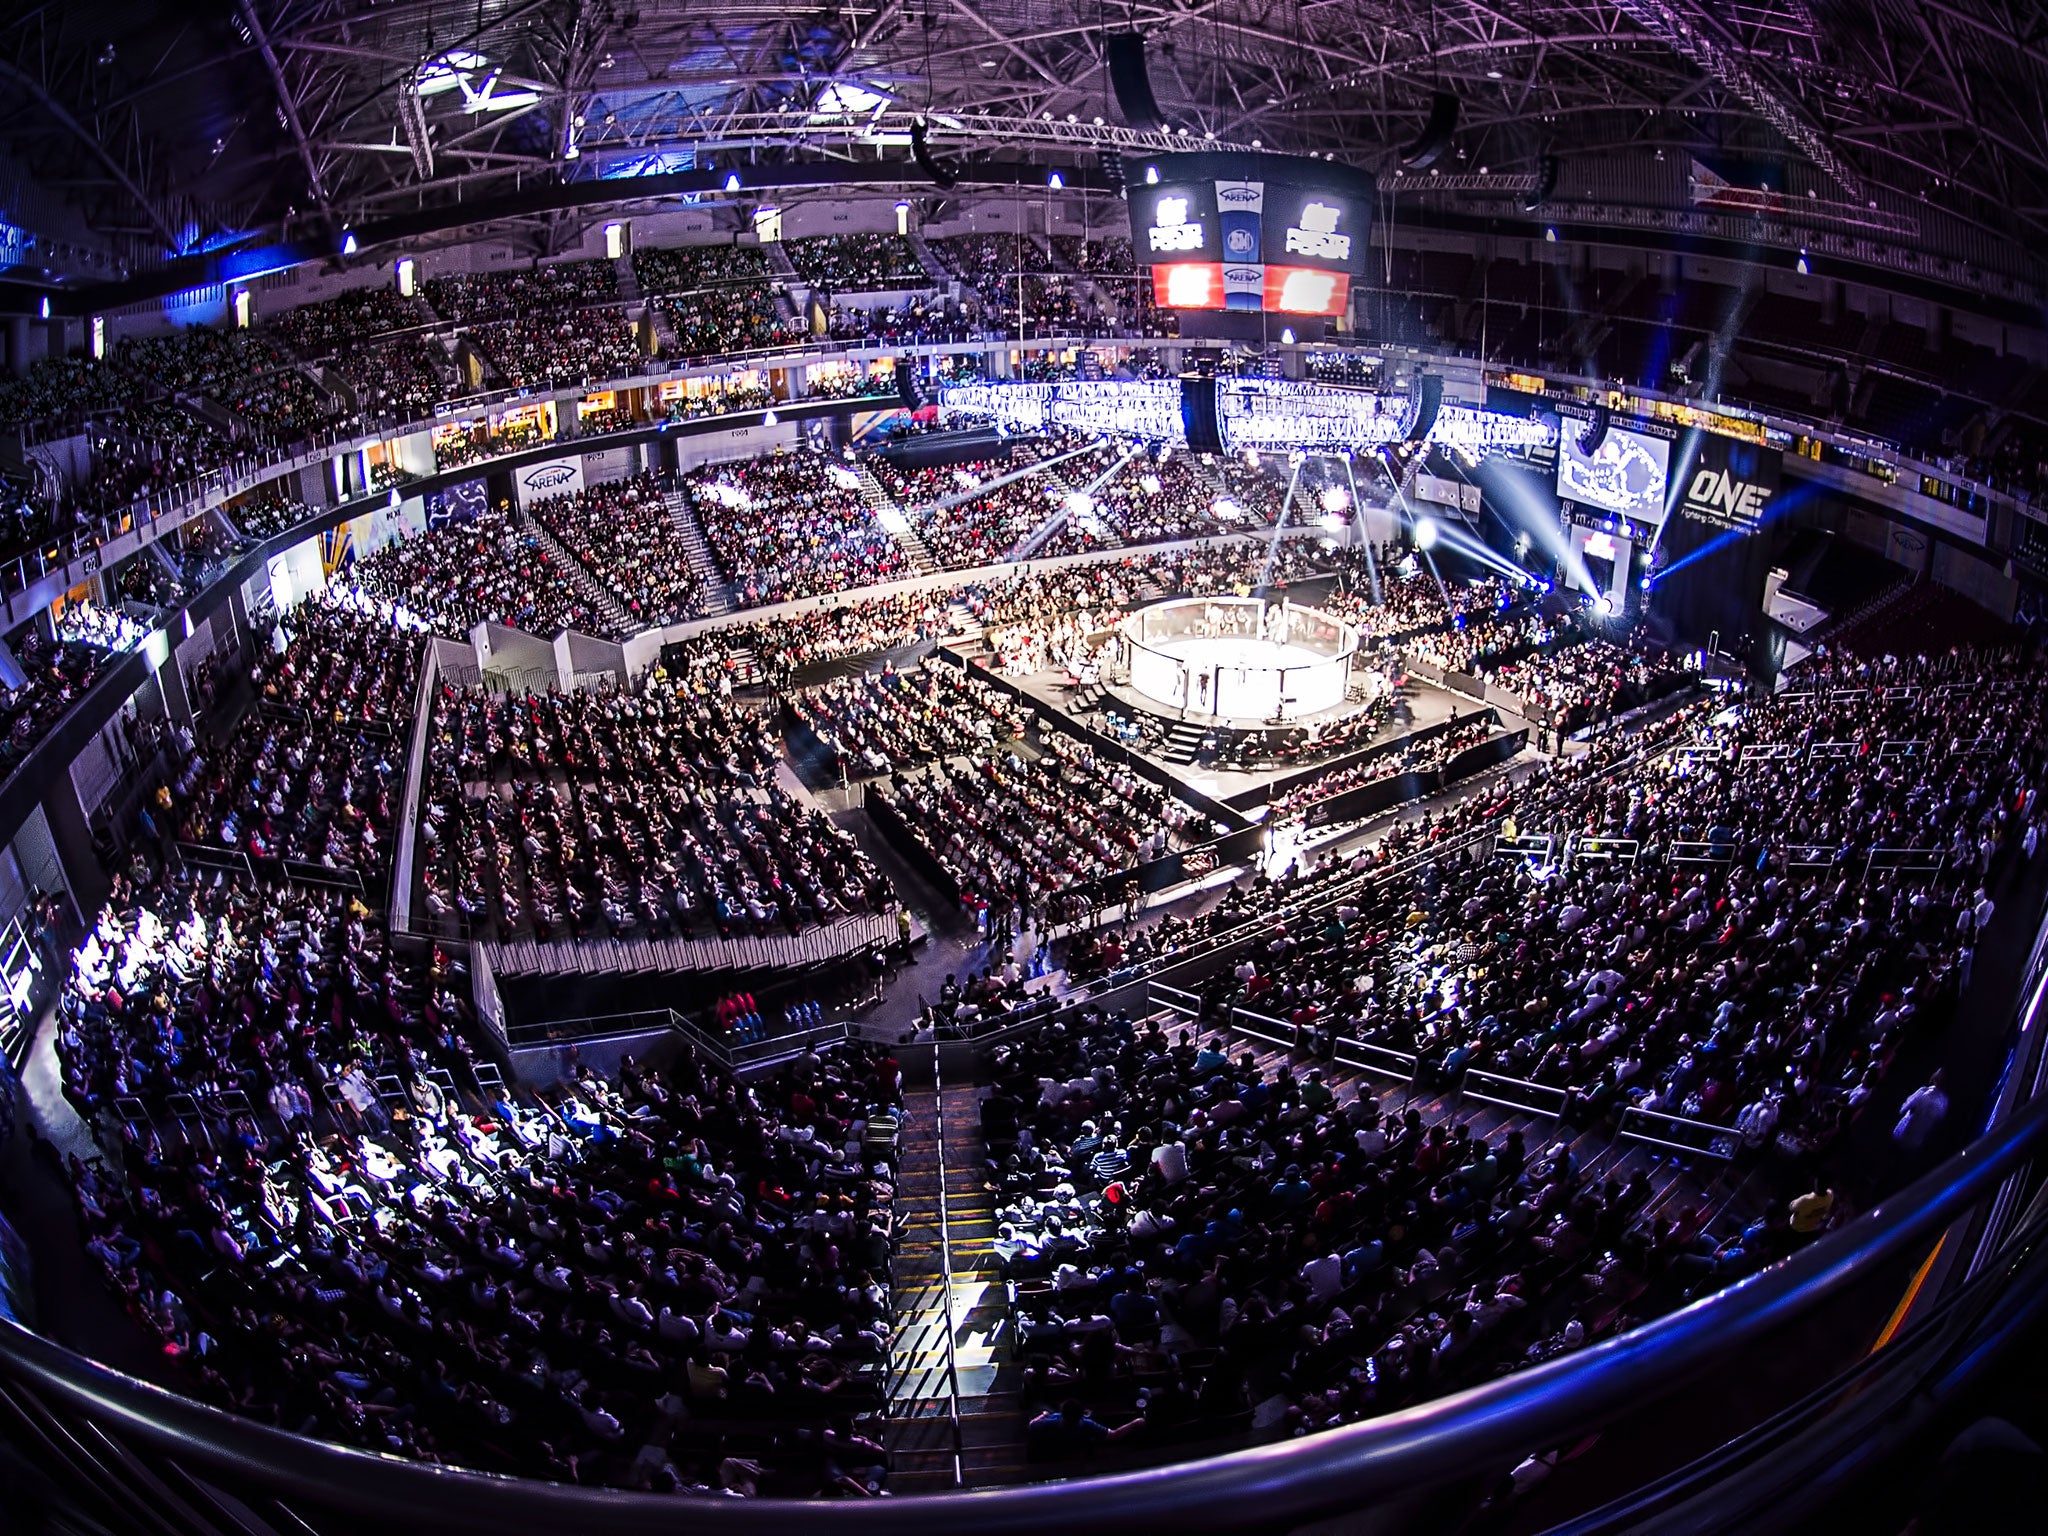 A view of a ONE Championship event